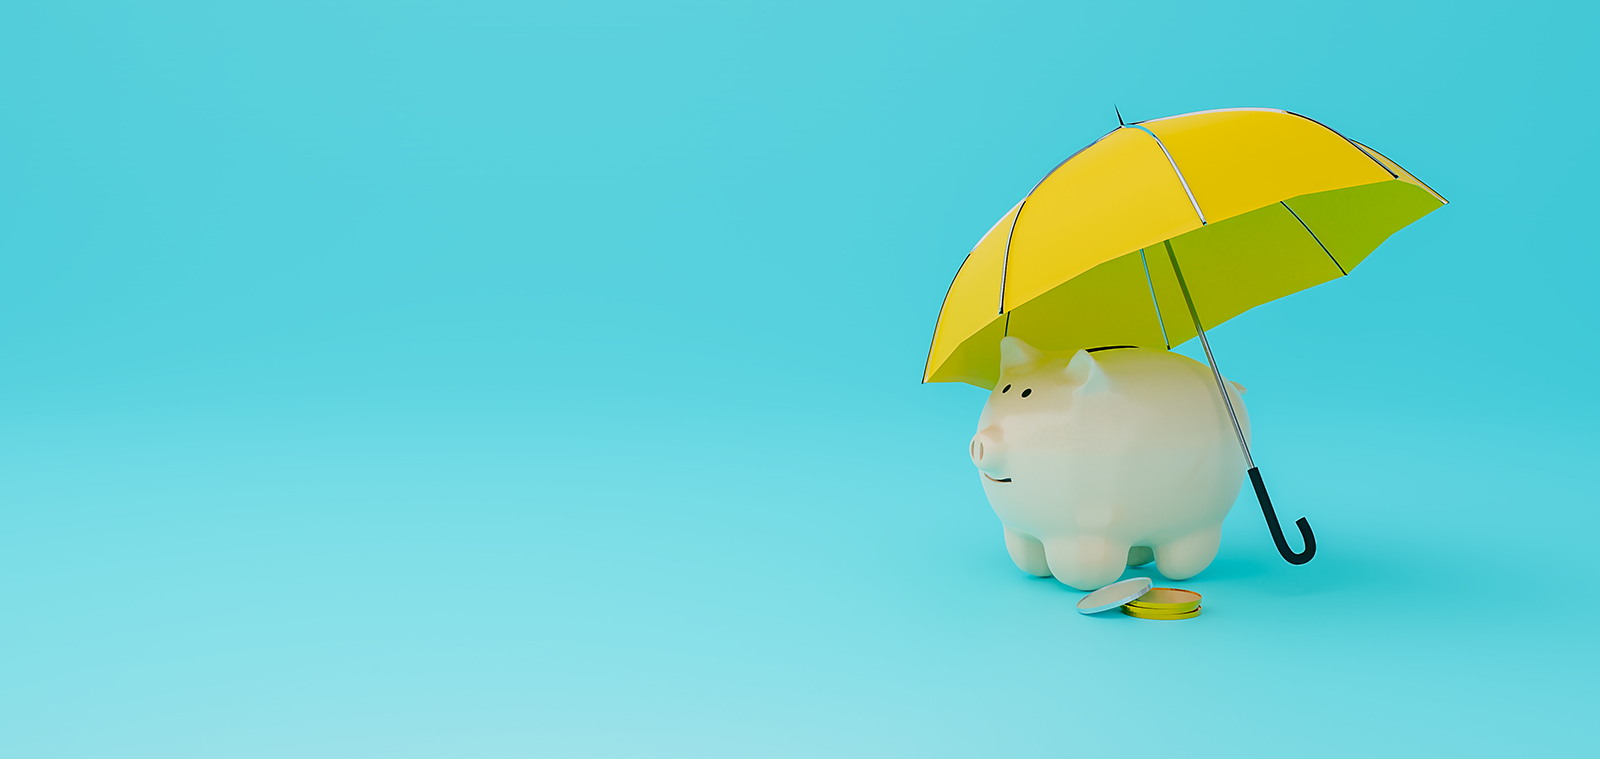 A piggy bank sits underneath a yellow umbrella, protecting it and some coins.